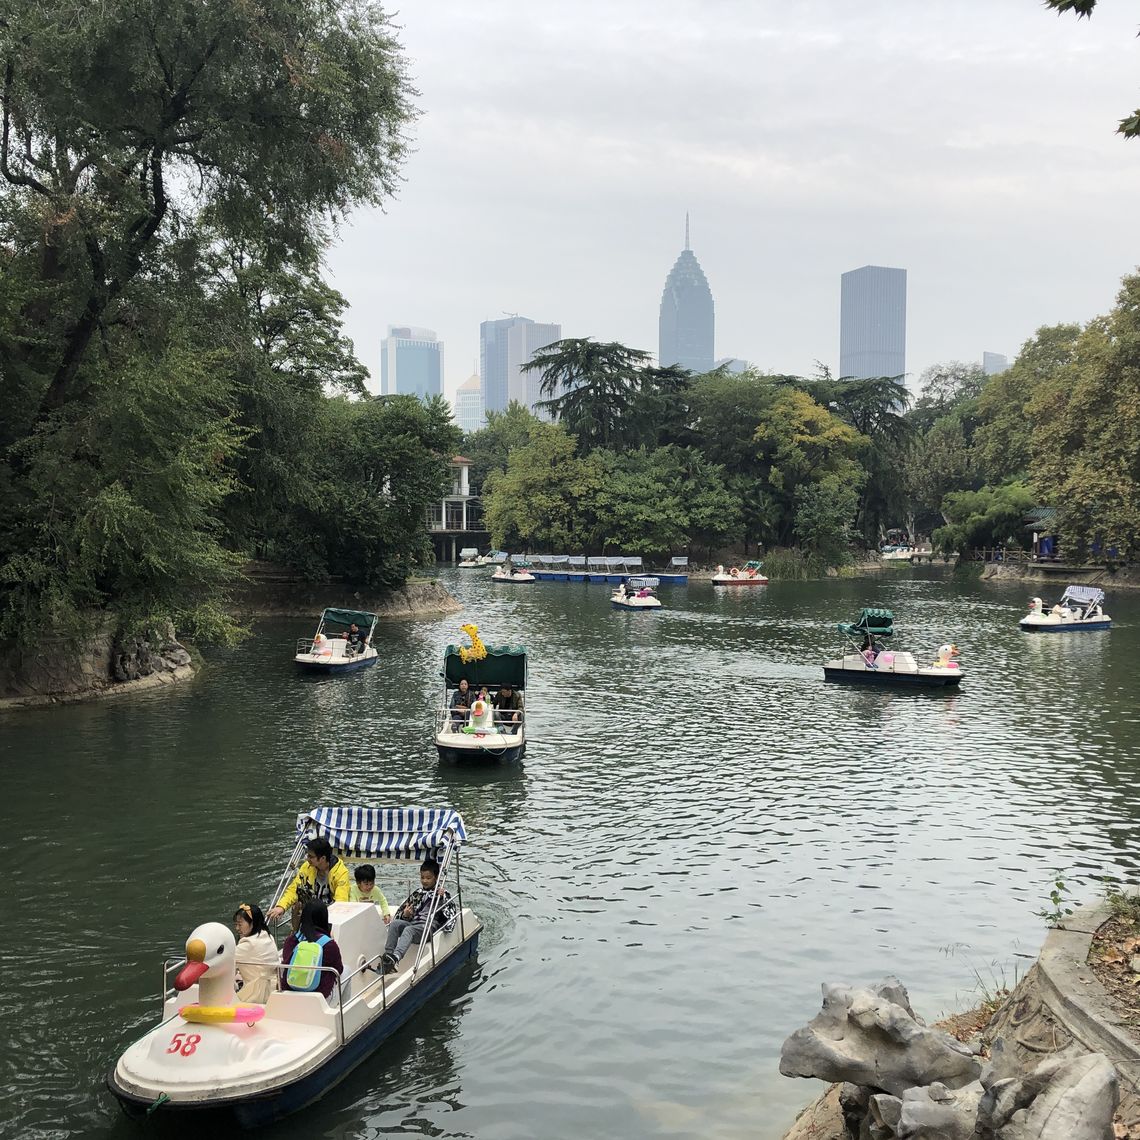 Zhongshan Park, a common name for Chinese parks in honor of Sun Zhongshan.